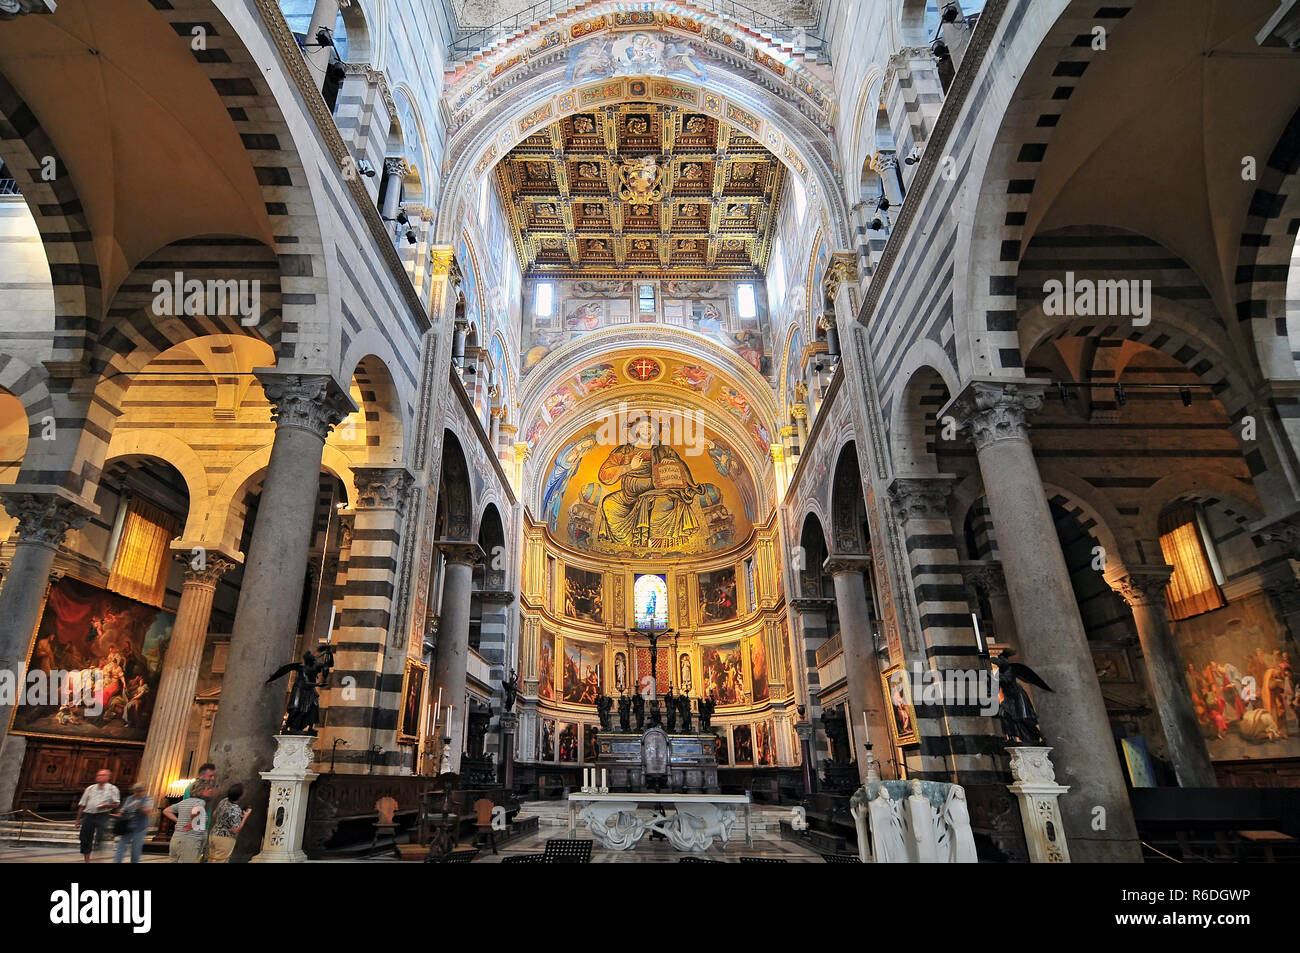 Interior View Of The Cathedral Of Pisa Piazza Dei Miracoli, Pisa, Italy Stock Photo